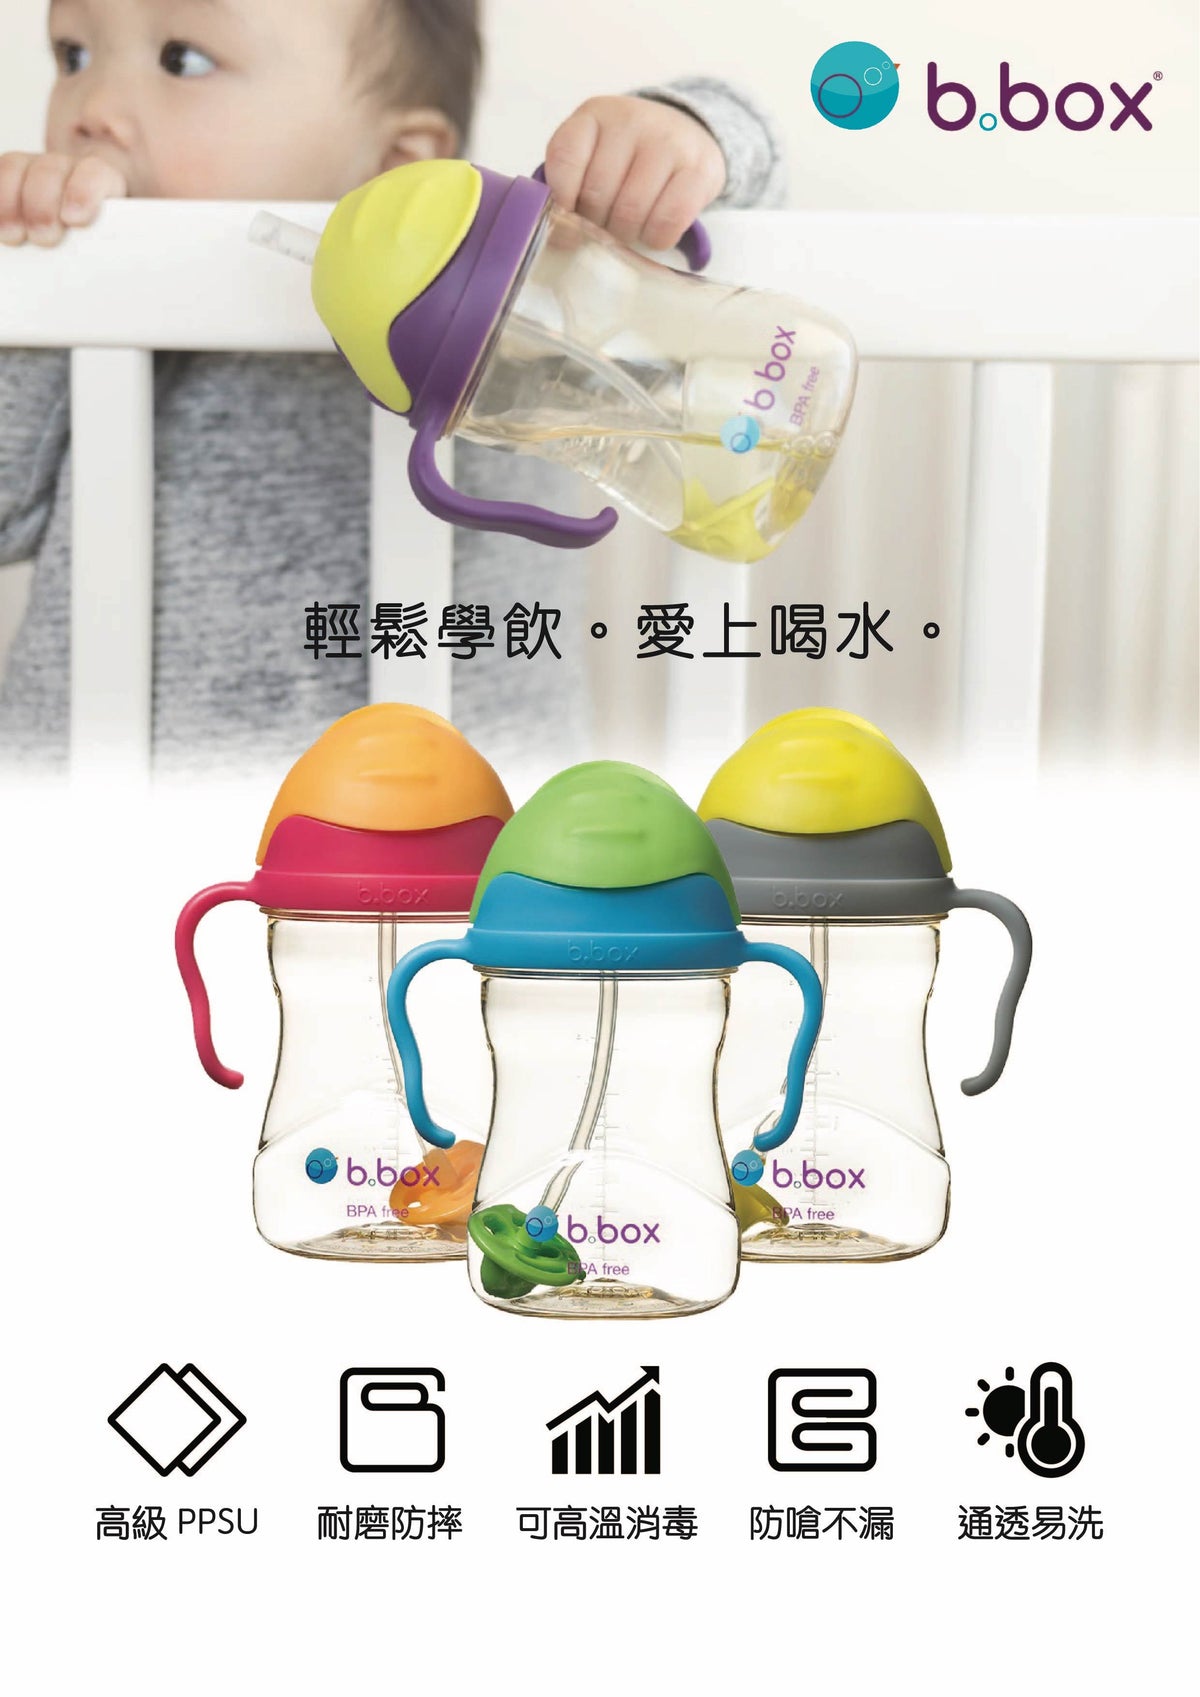 b.box NEW Sippy Cup - Deluxe Edition - PPSU - Yellow Grey